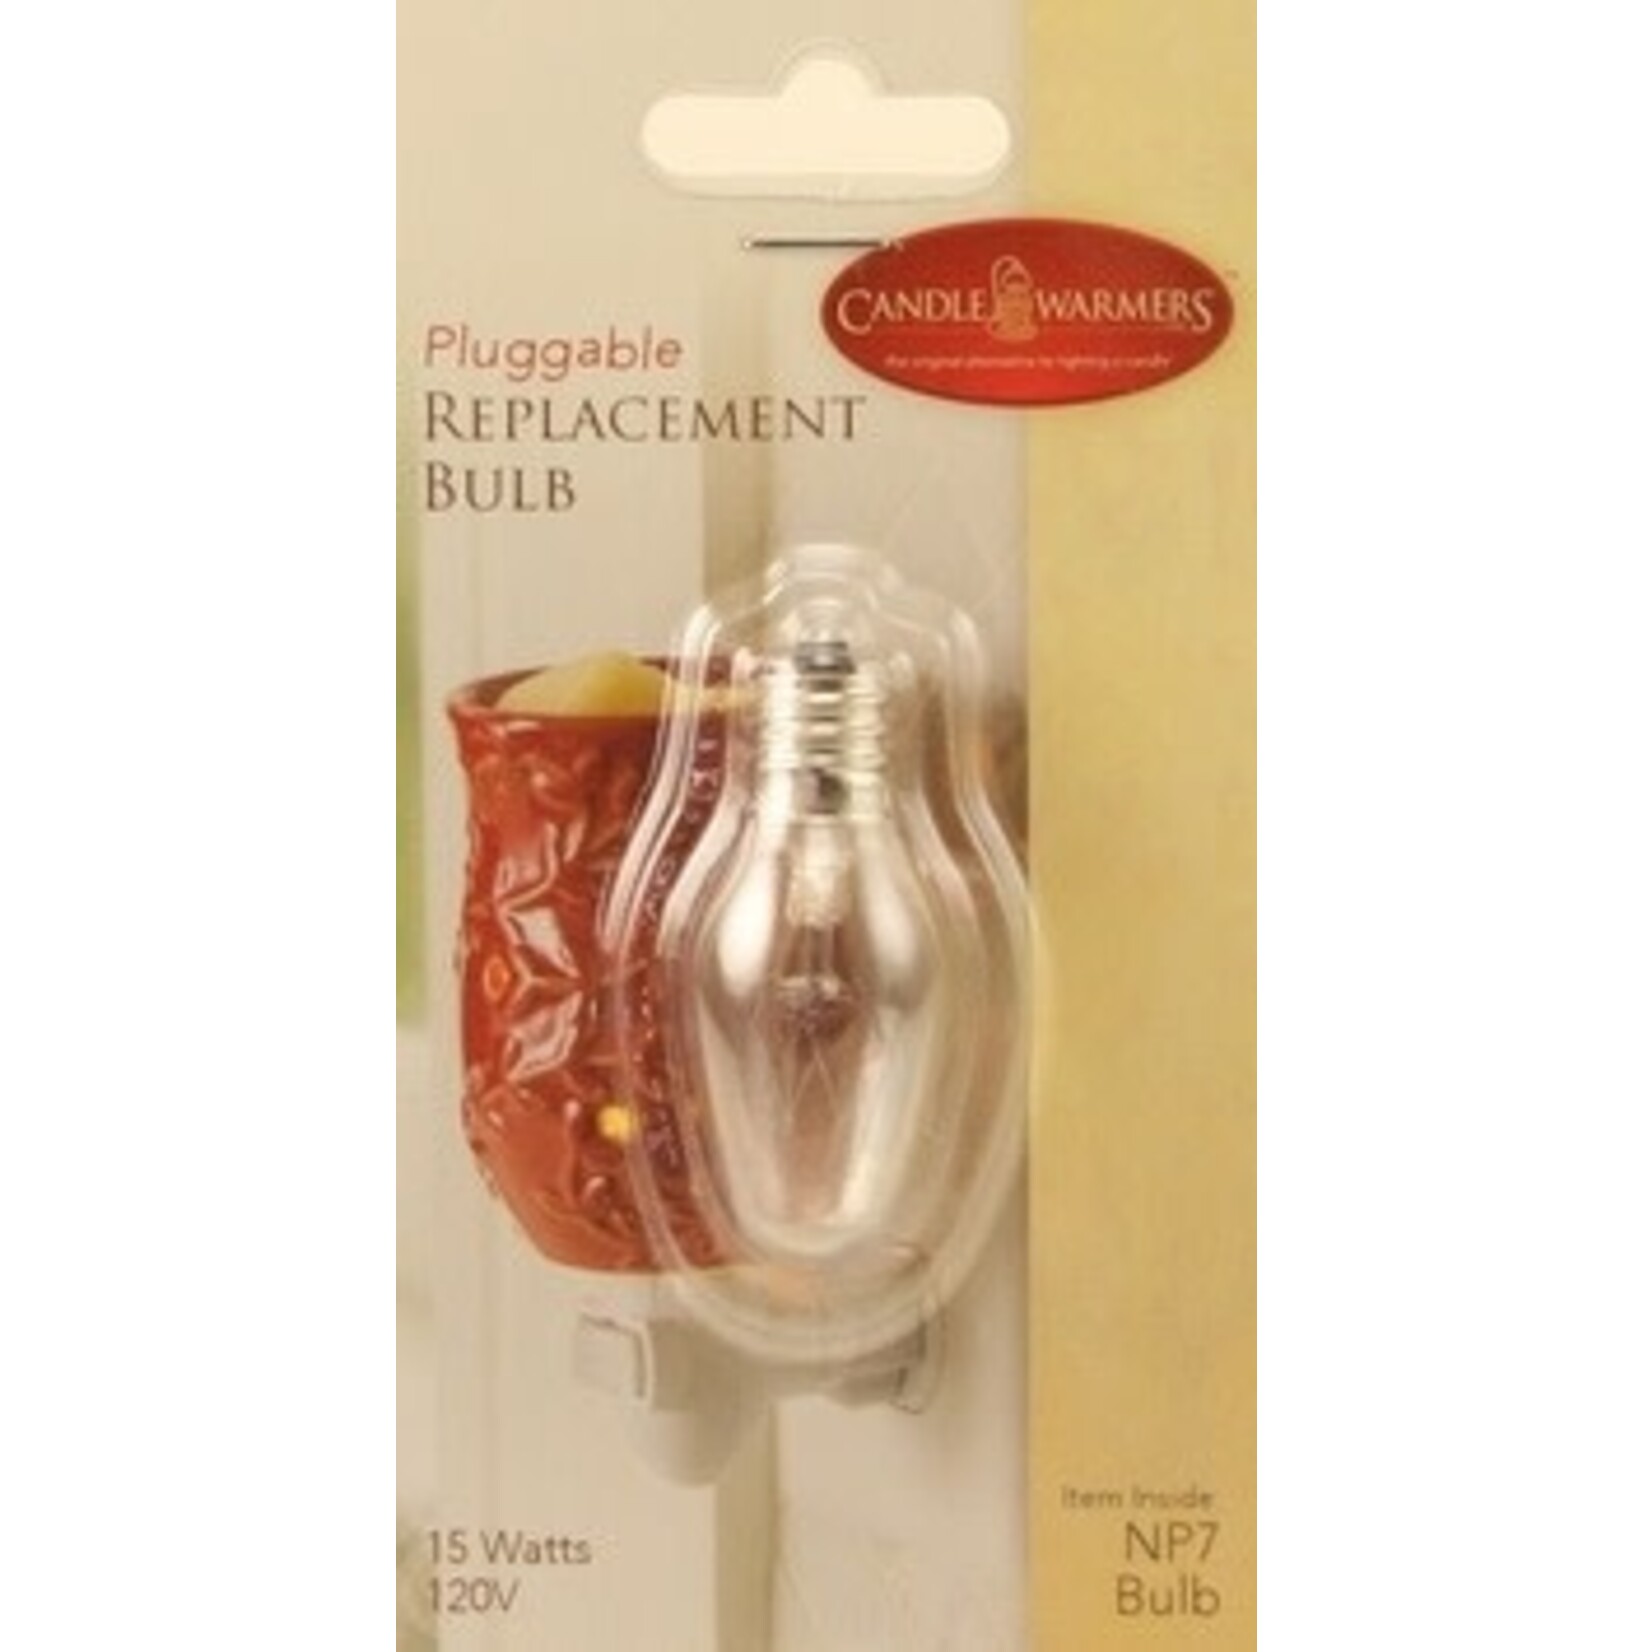 Candle Warmers Pluggable Replacement Bulb